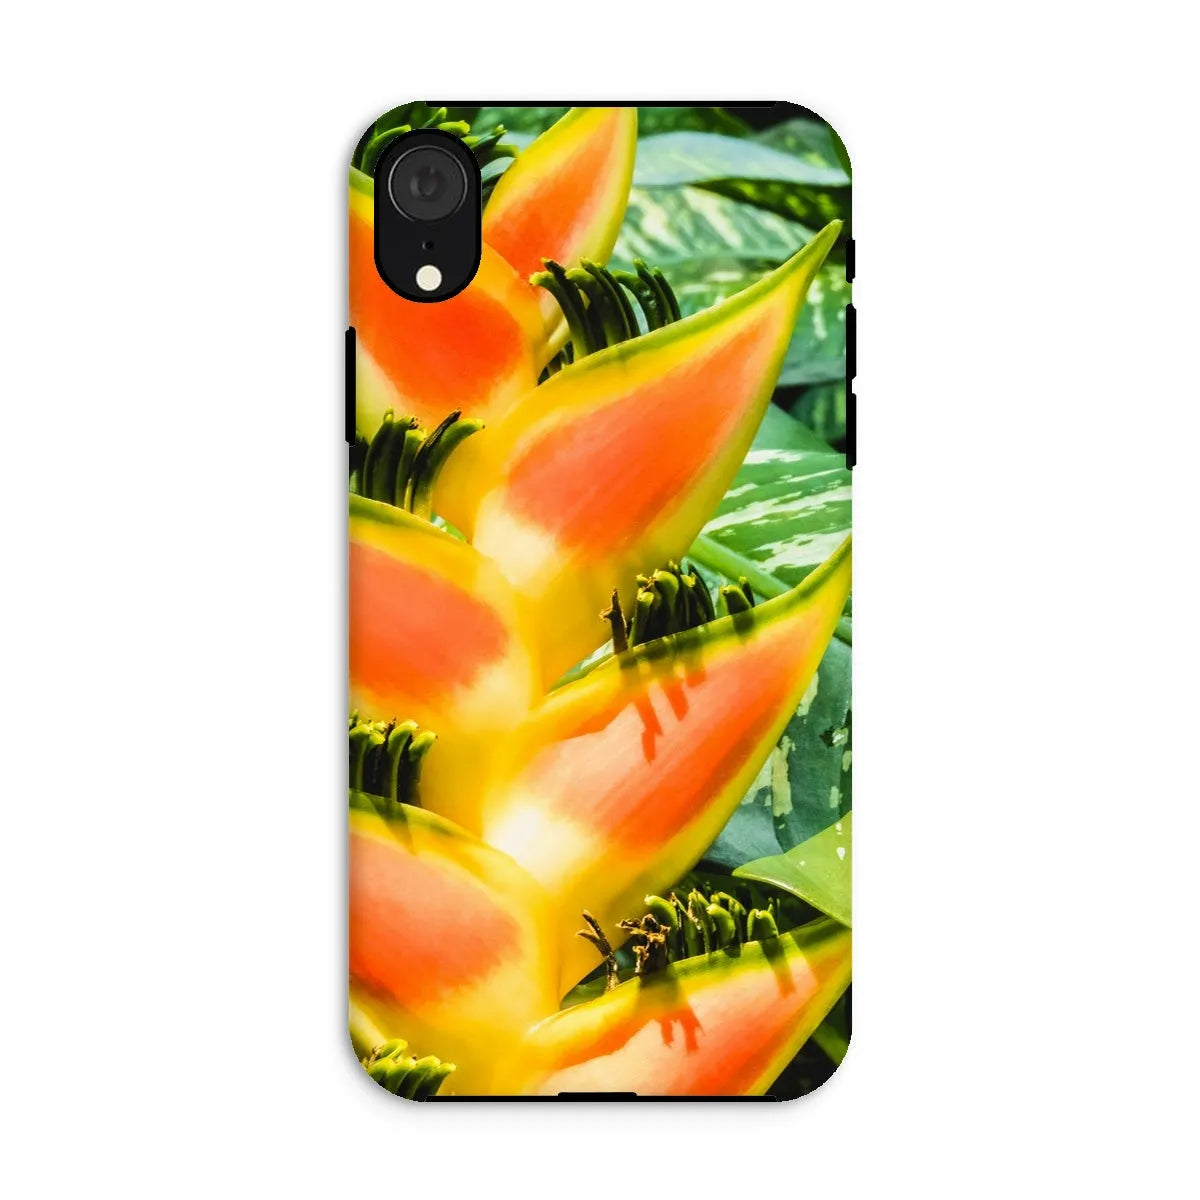 Showstopper Tough Phone Case - Iphone Xr / Matte - Mobile Phone Cases - Aesthetic Art